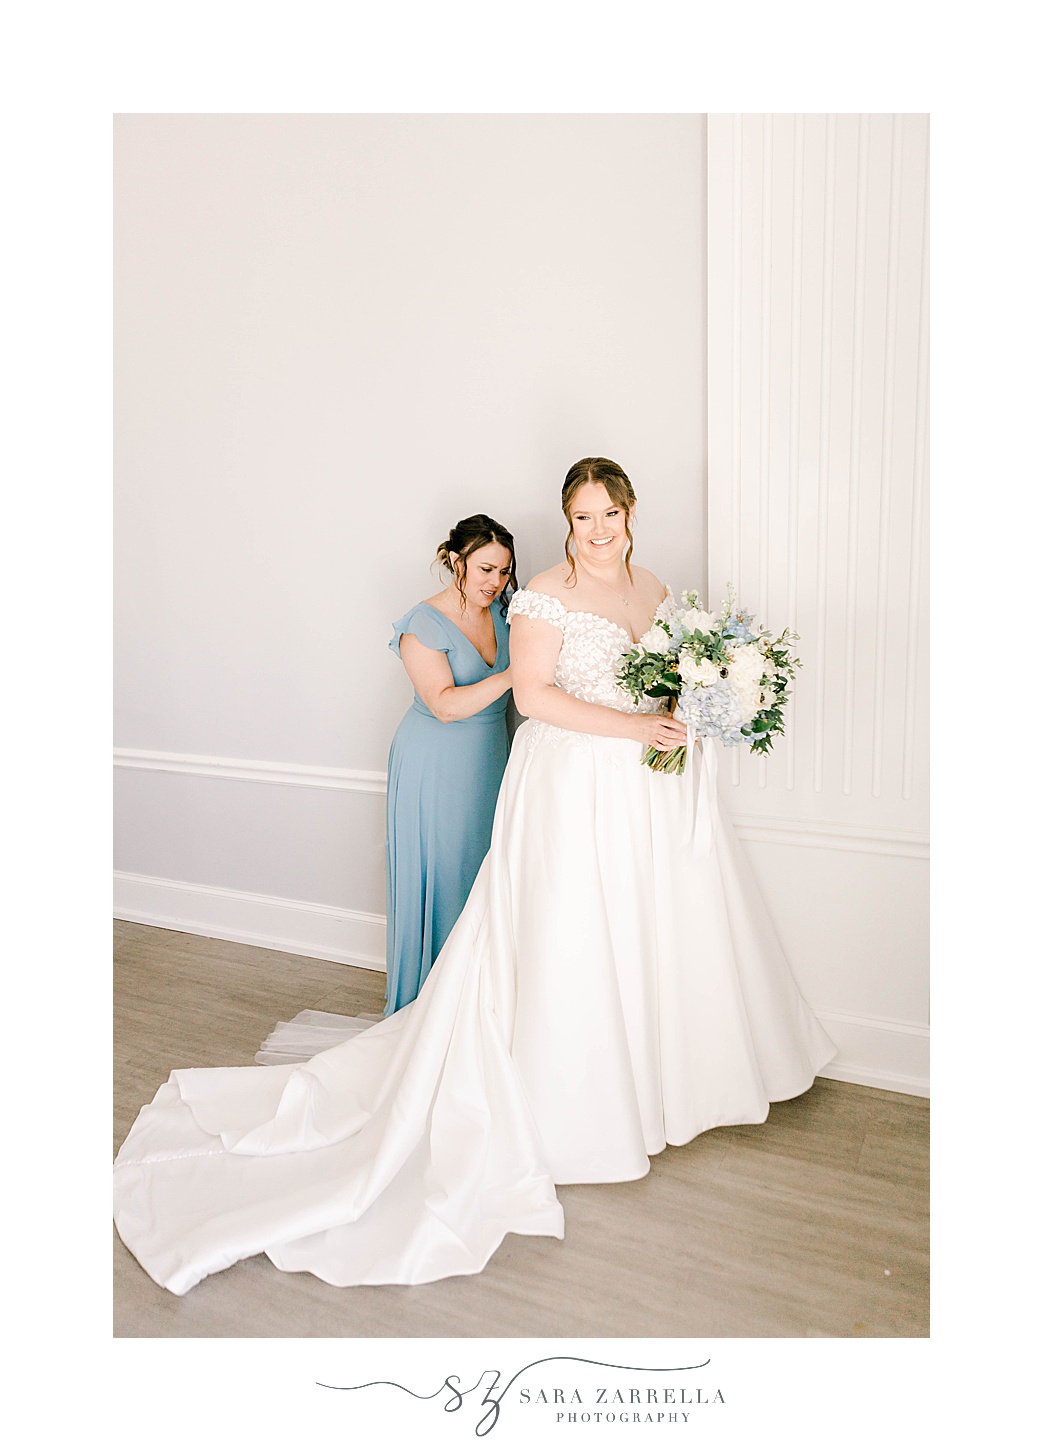 bridesmaid in light blue gown helps bride into wedding dress